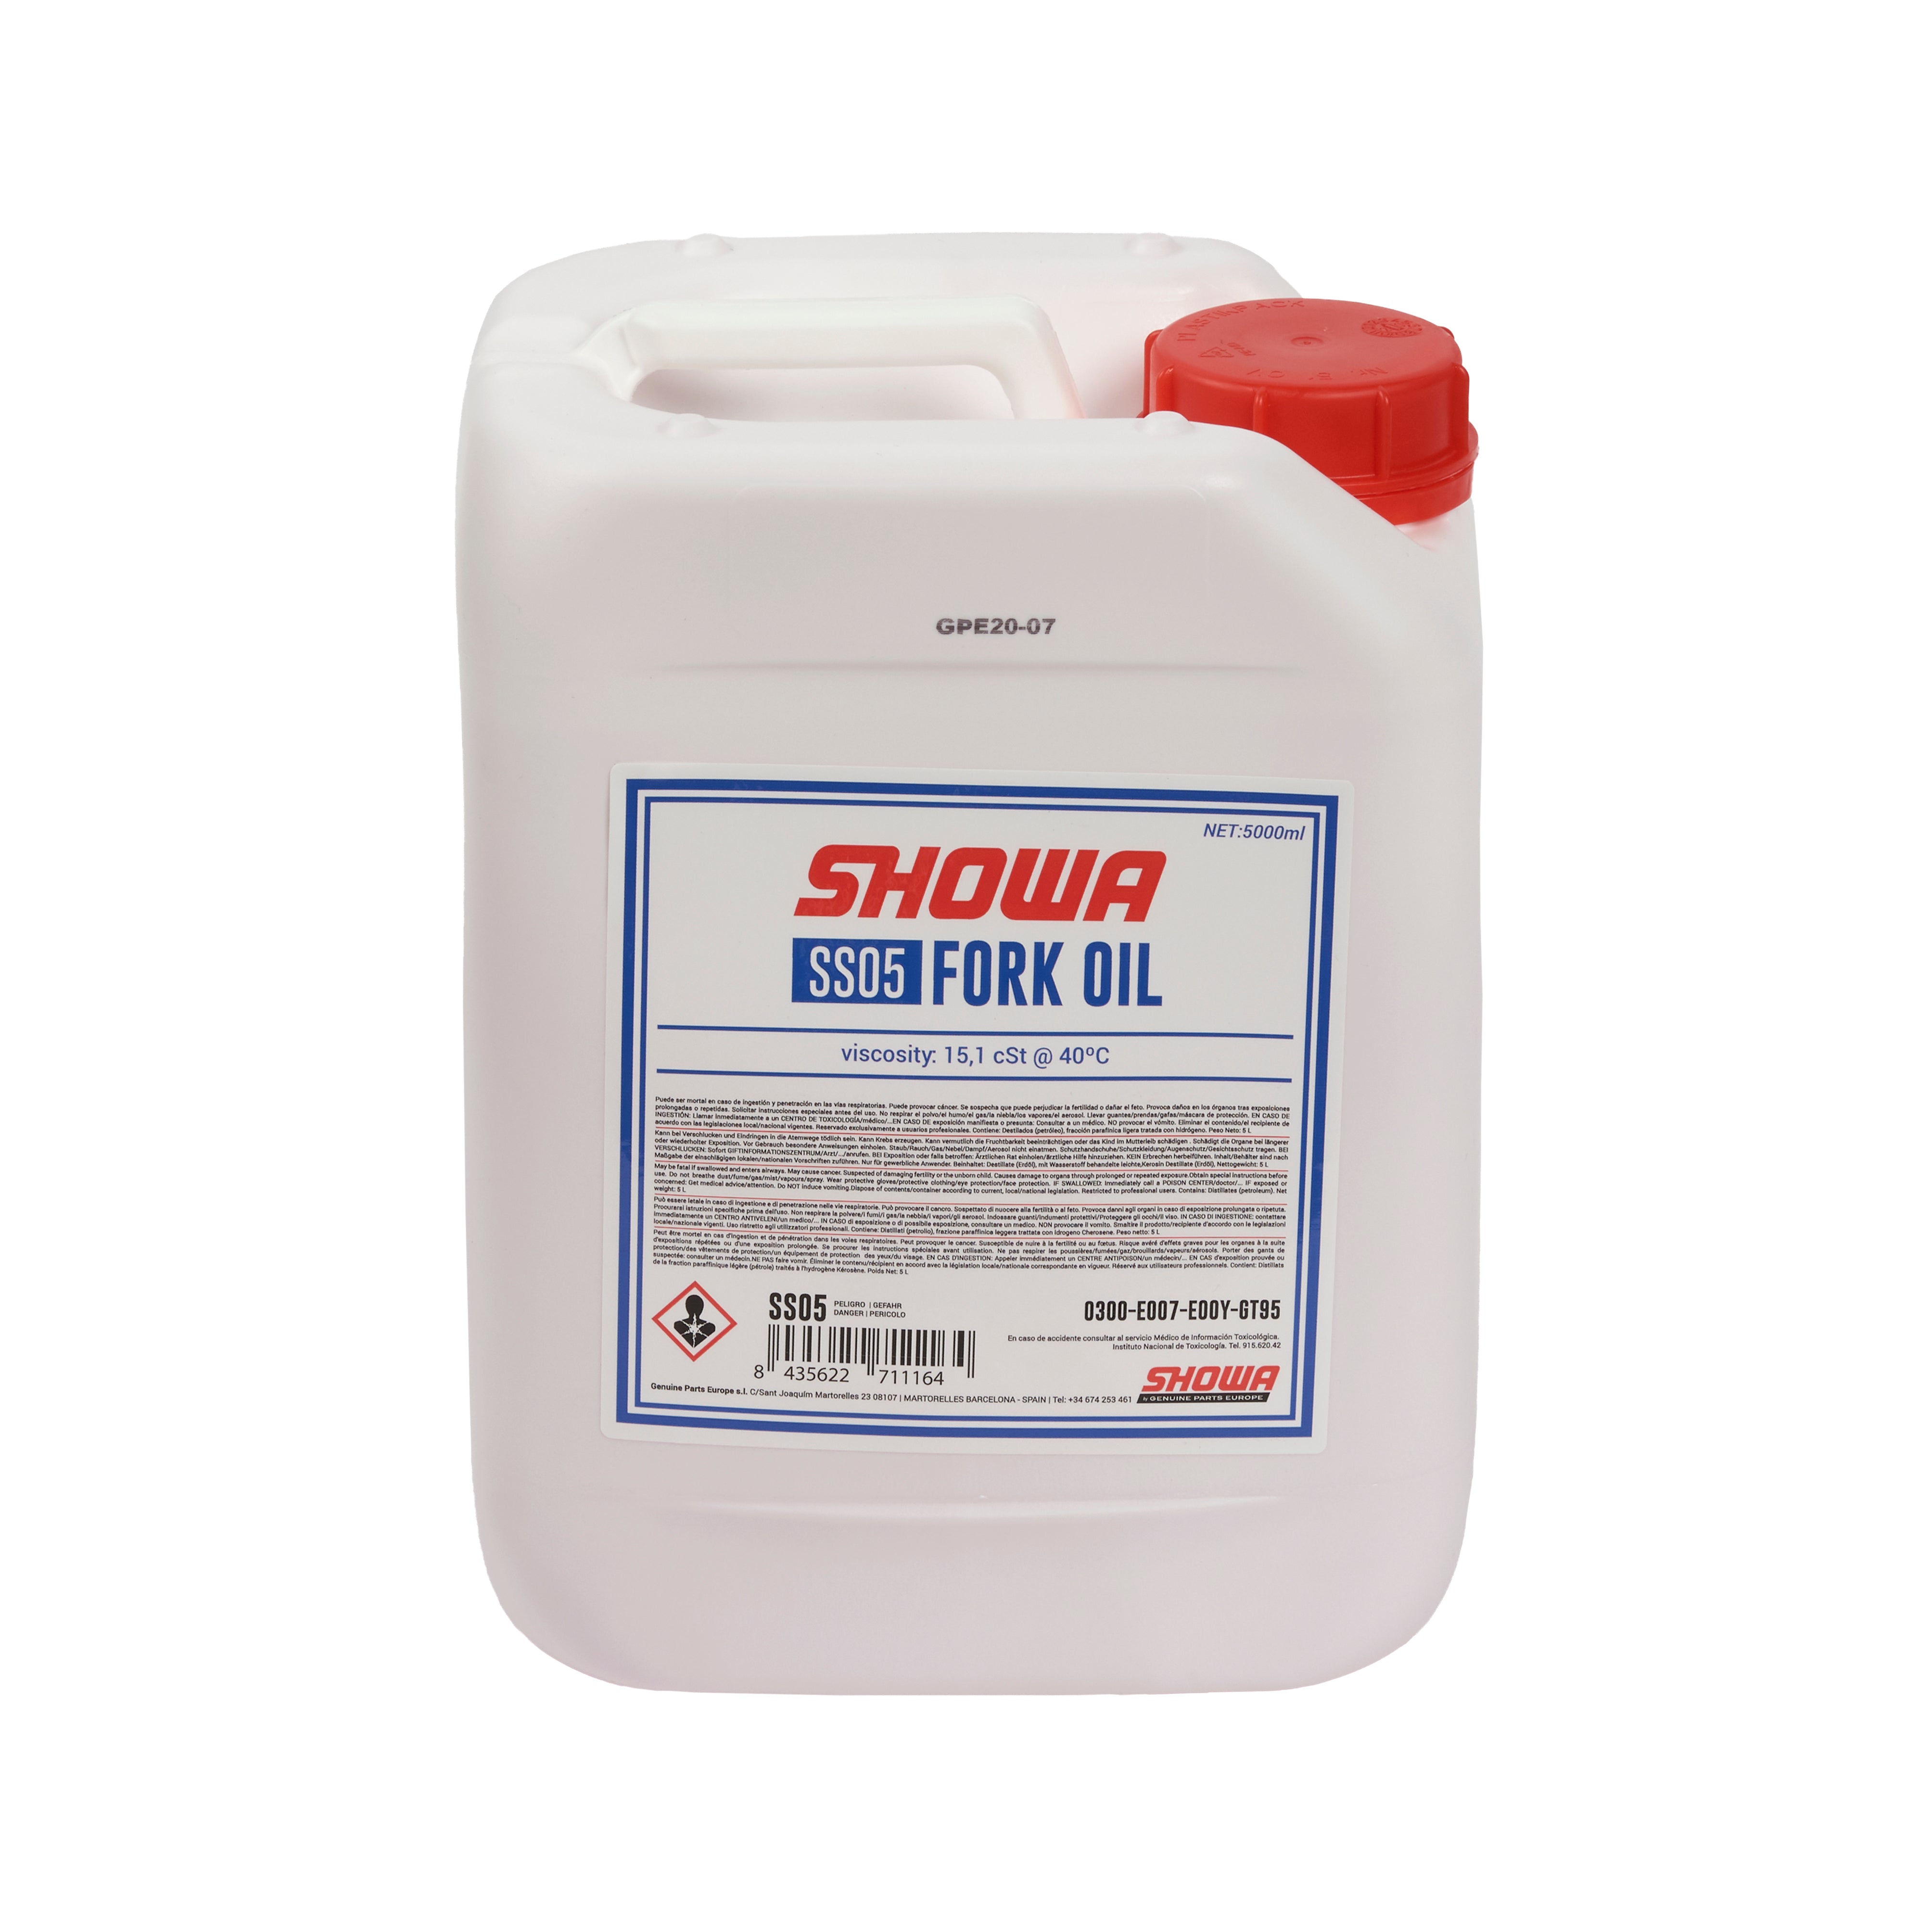 SHOWA RS OIL SS25 (3,63 CST at 40¼C) 5 LITER